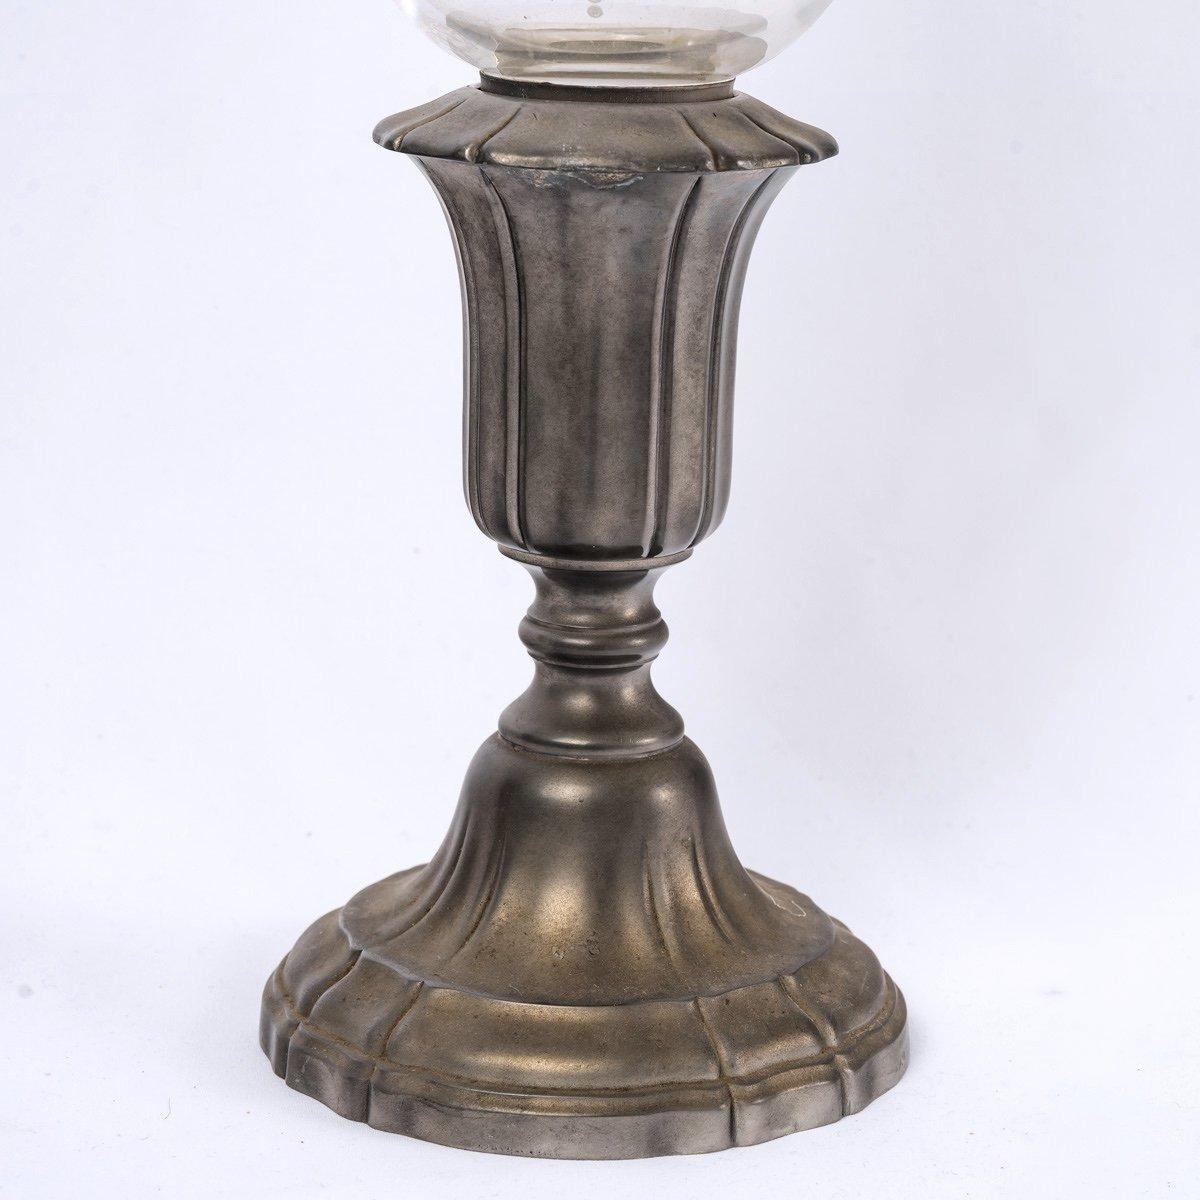 The candle-holder lamp is made from Baccarat crystal and is engraved with a beautiful Renaissance-style decoration of scrolls, arabesques and vegetal volutes.
The candlestick is made of pewter by 